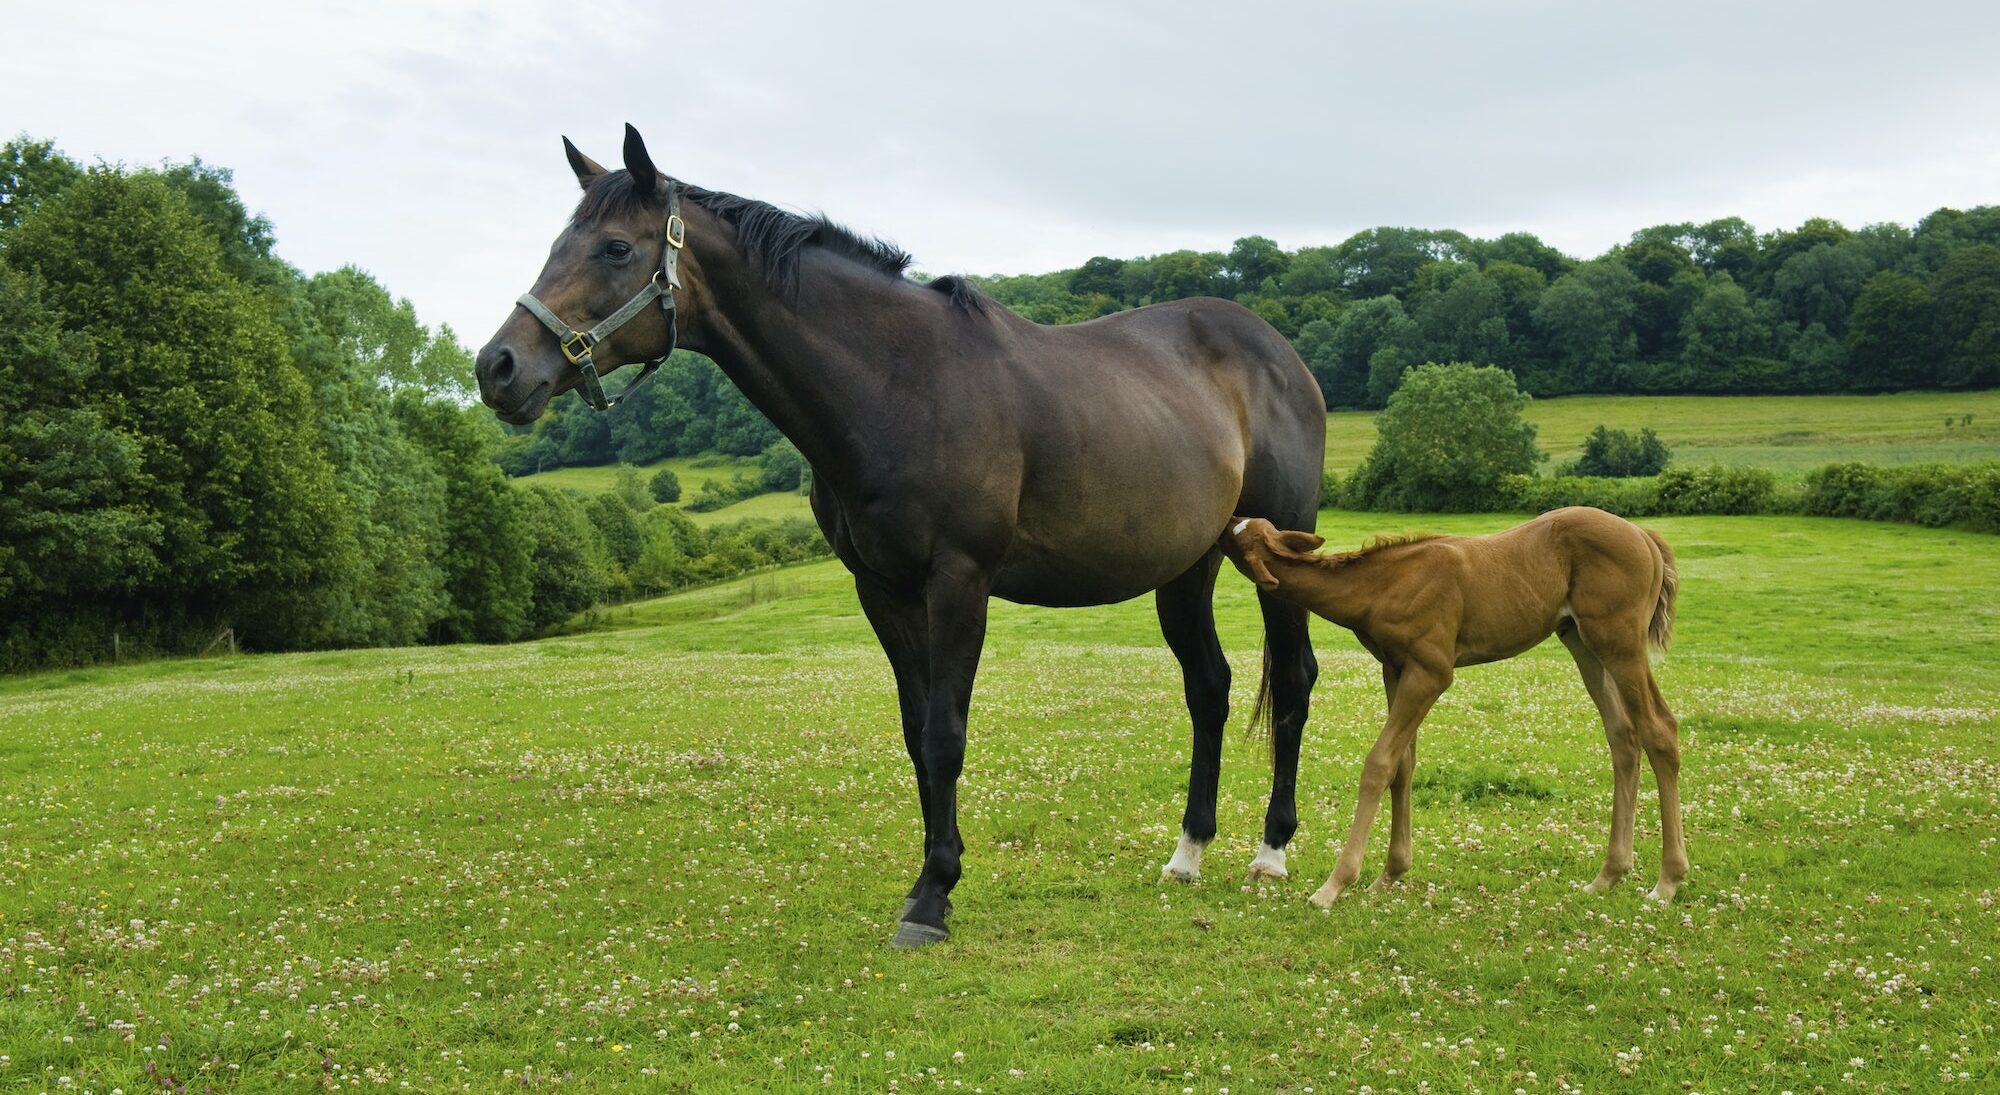 A horse and foal in a field.